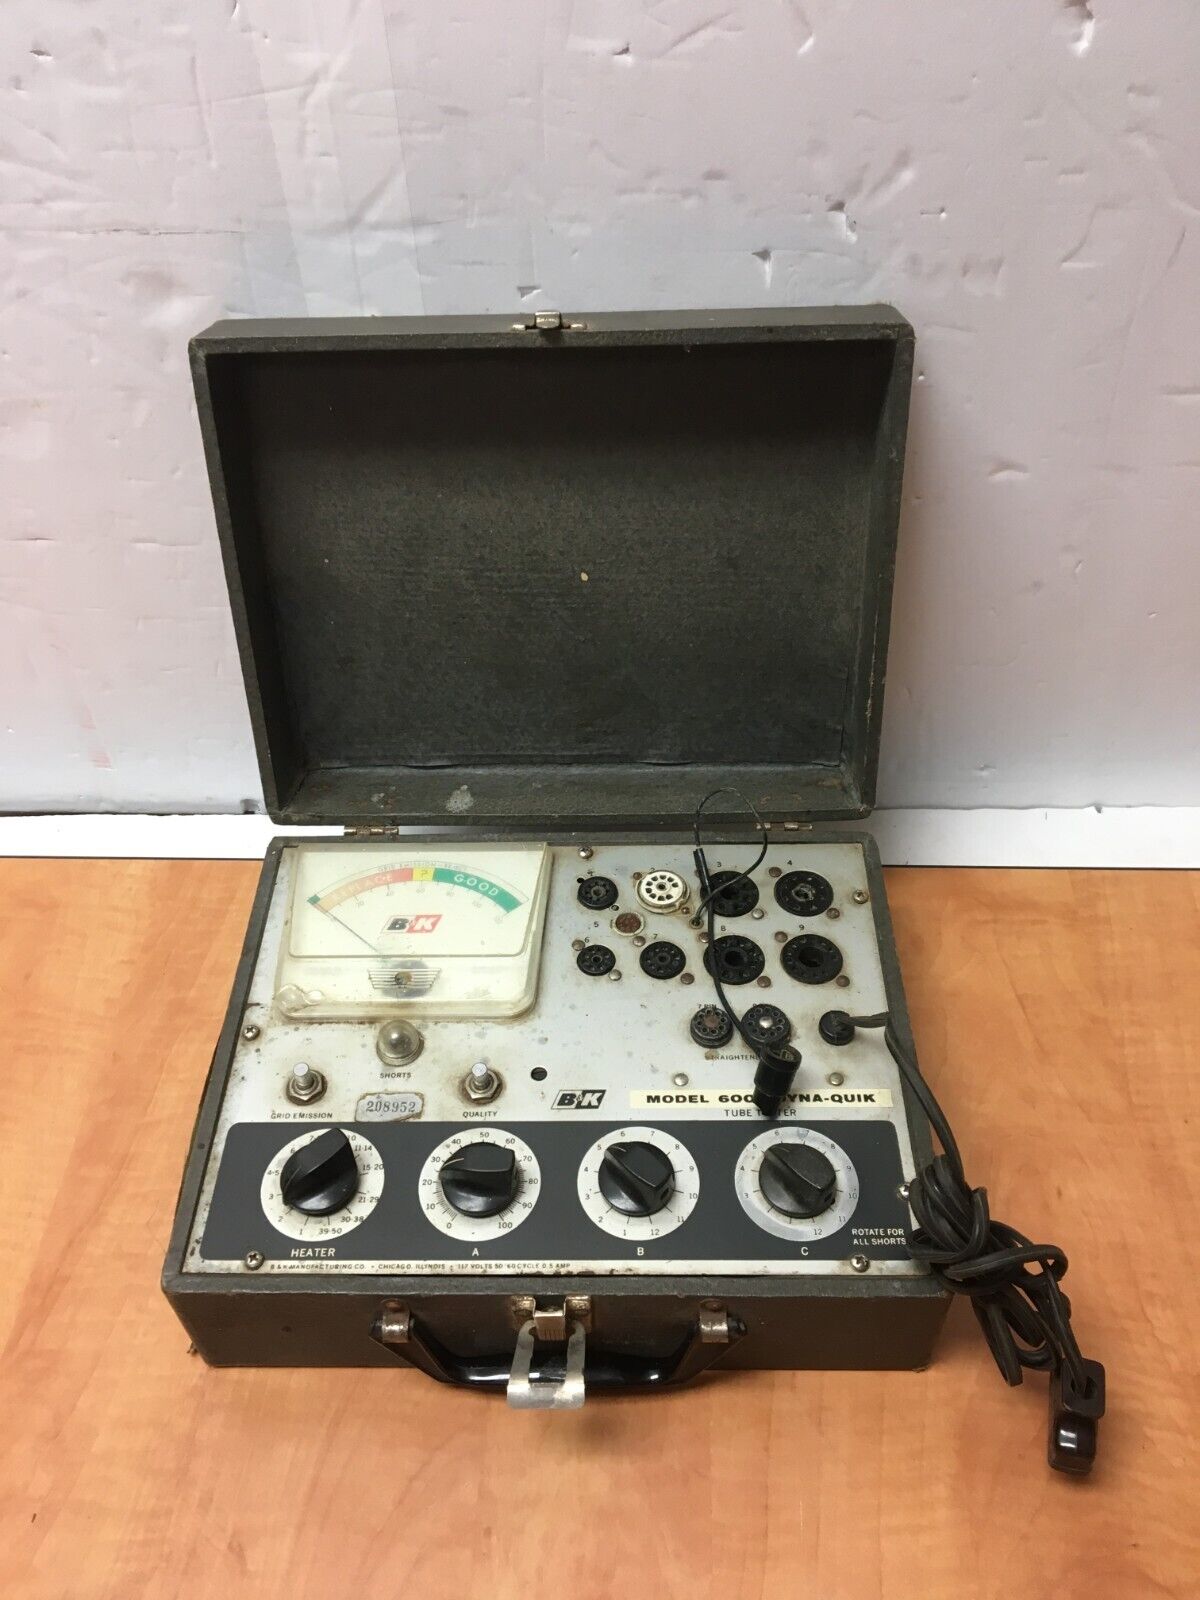 VINTAGE B & K MODEL 600 DYNA-QUICK VACUUM TUBE TESTER for parts or repair